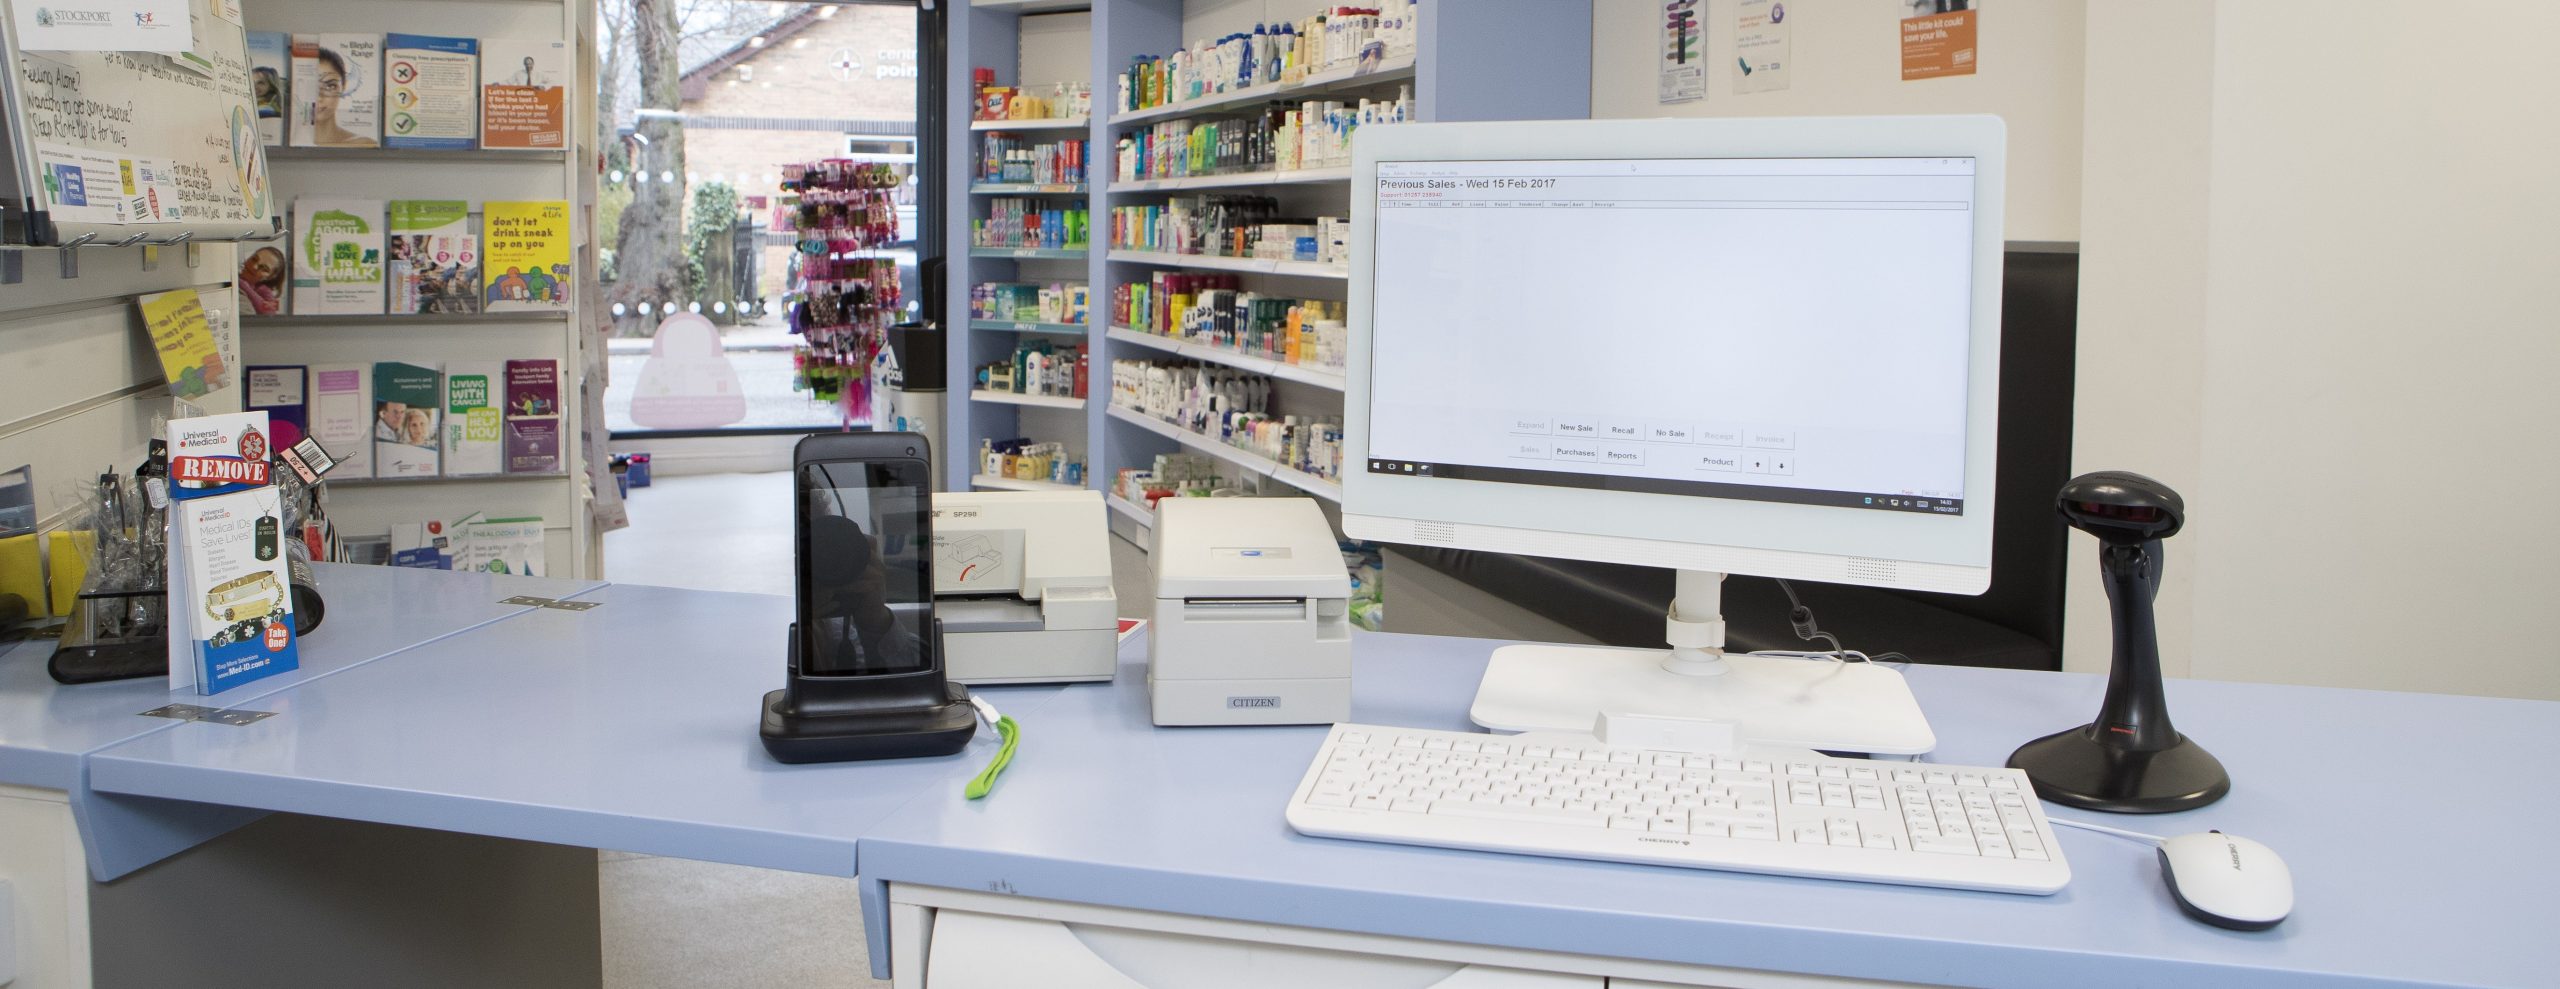 pharmacy management software